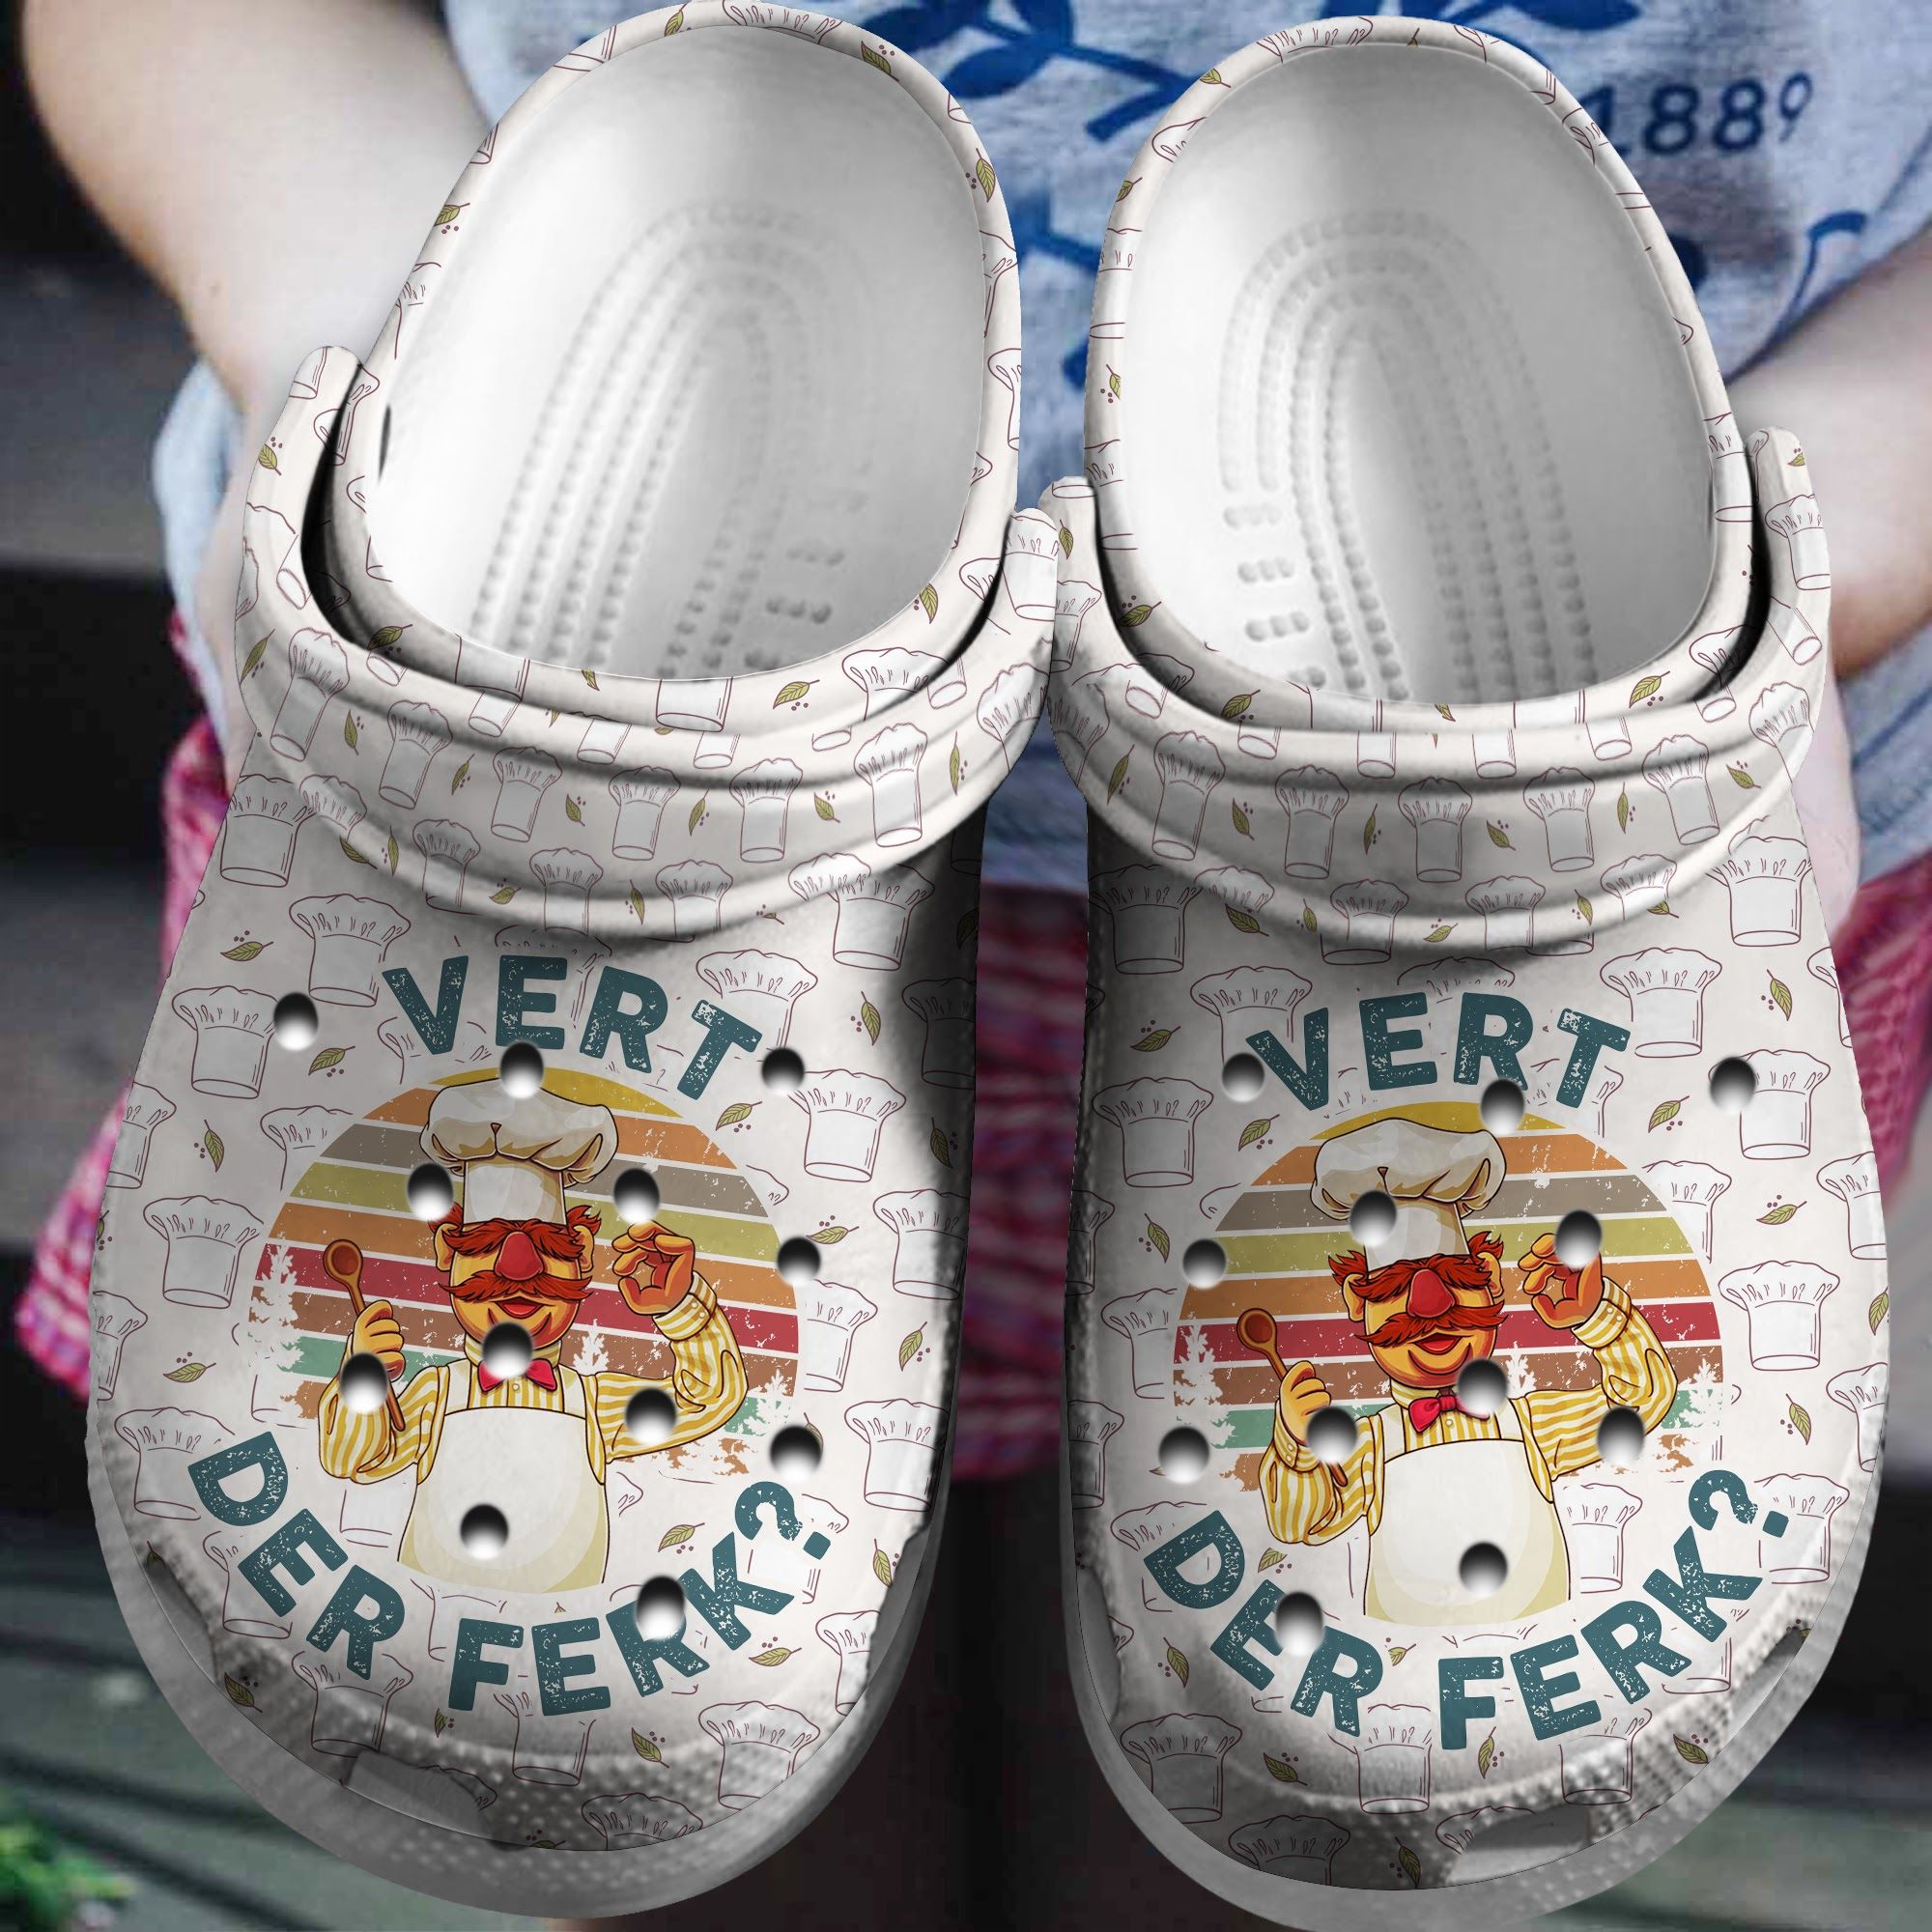 Find yourself a super cute Crocs shoe or give it as a gift 156